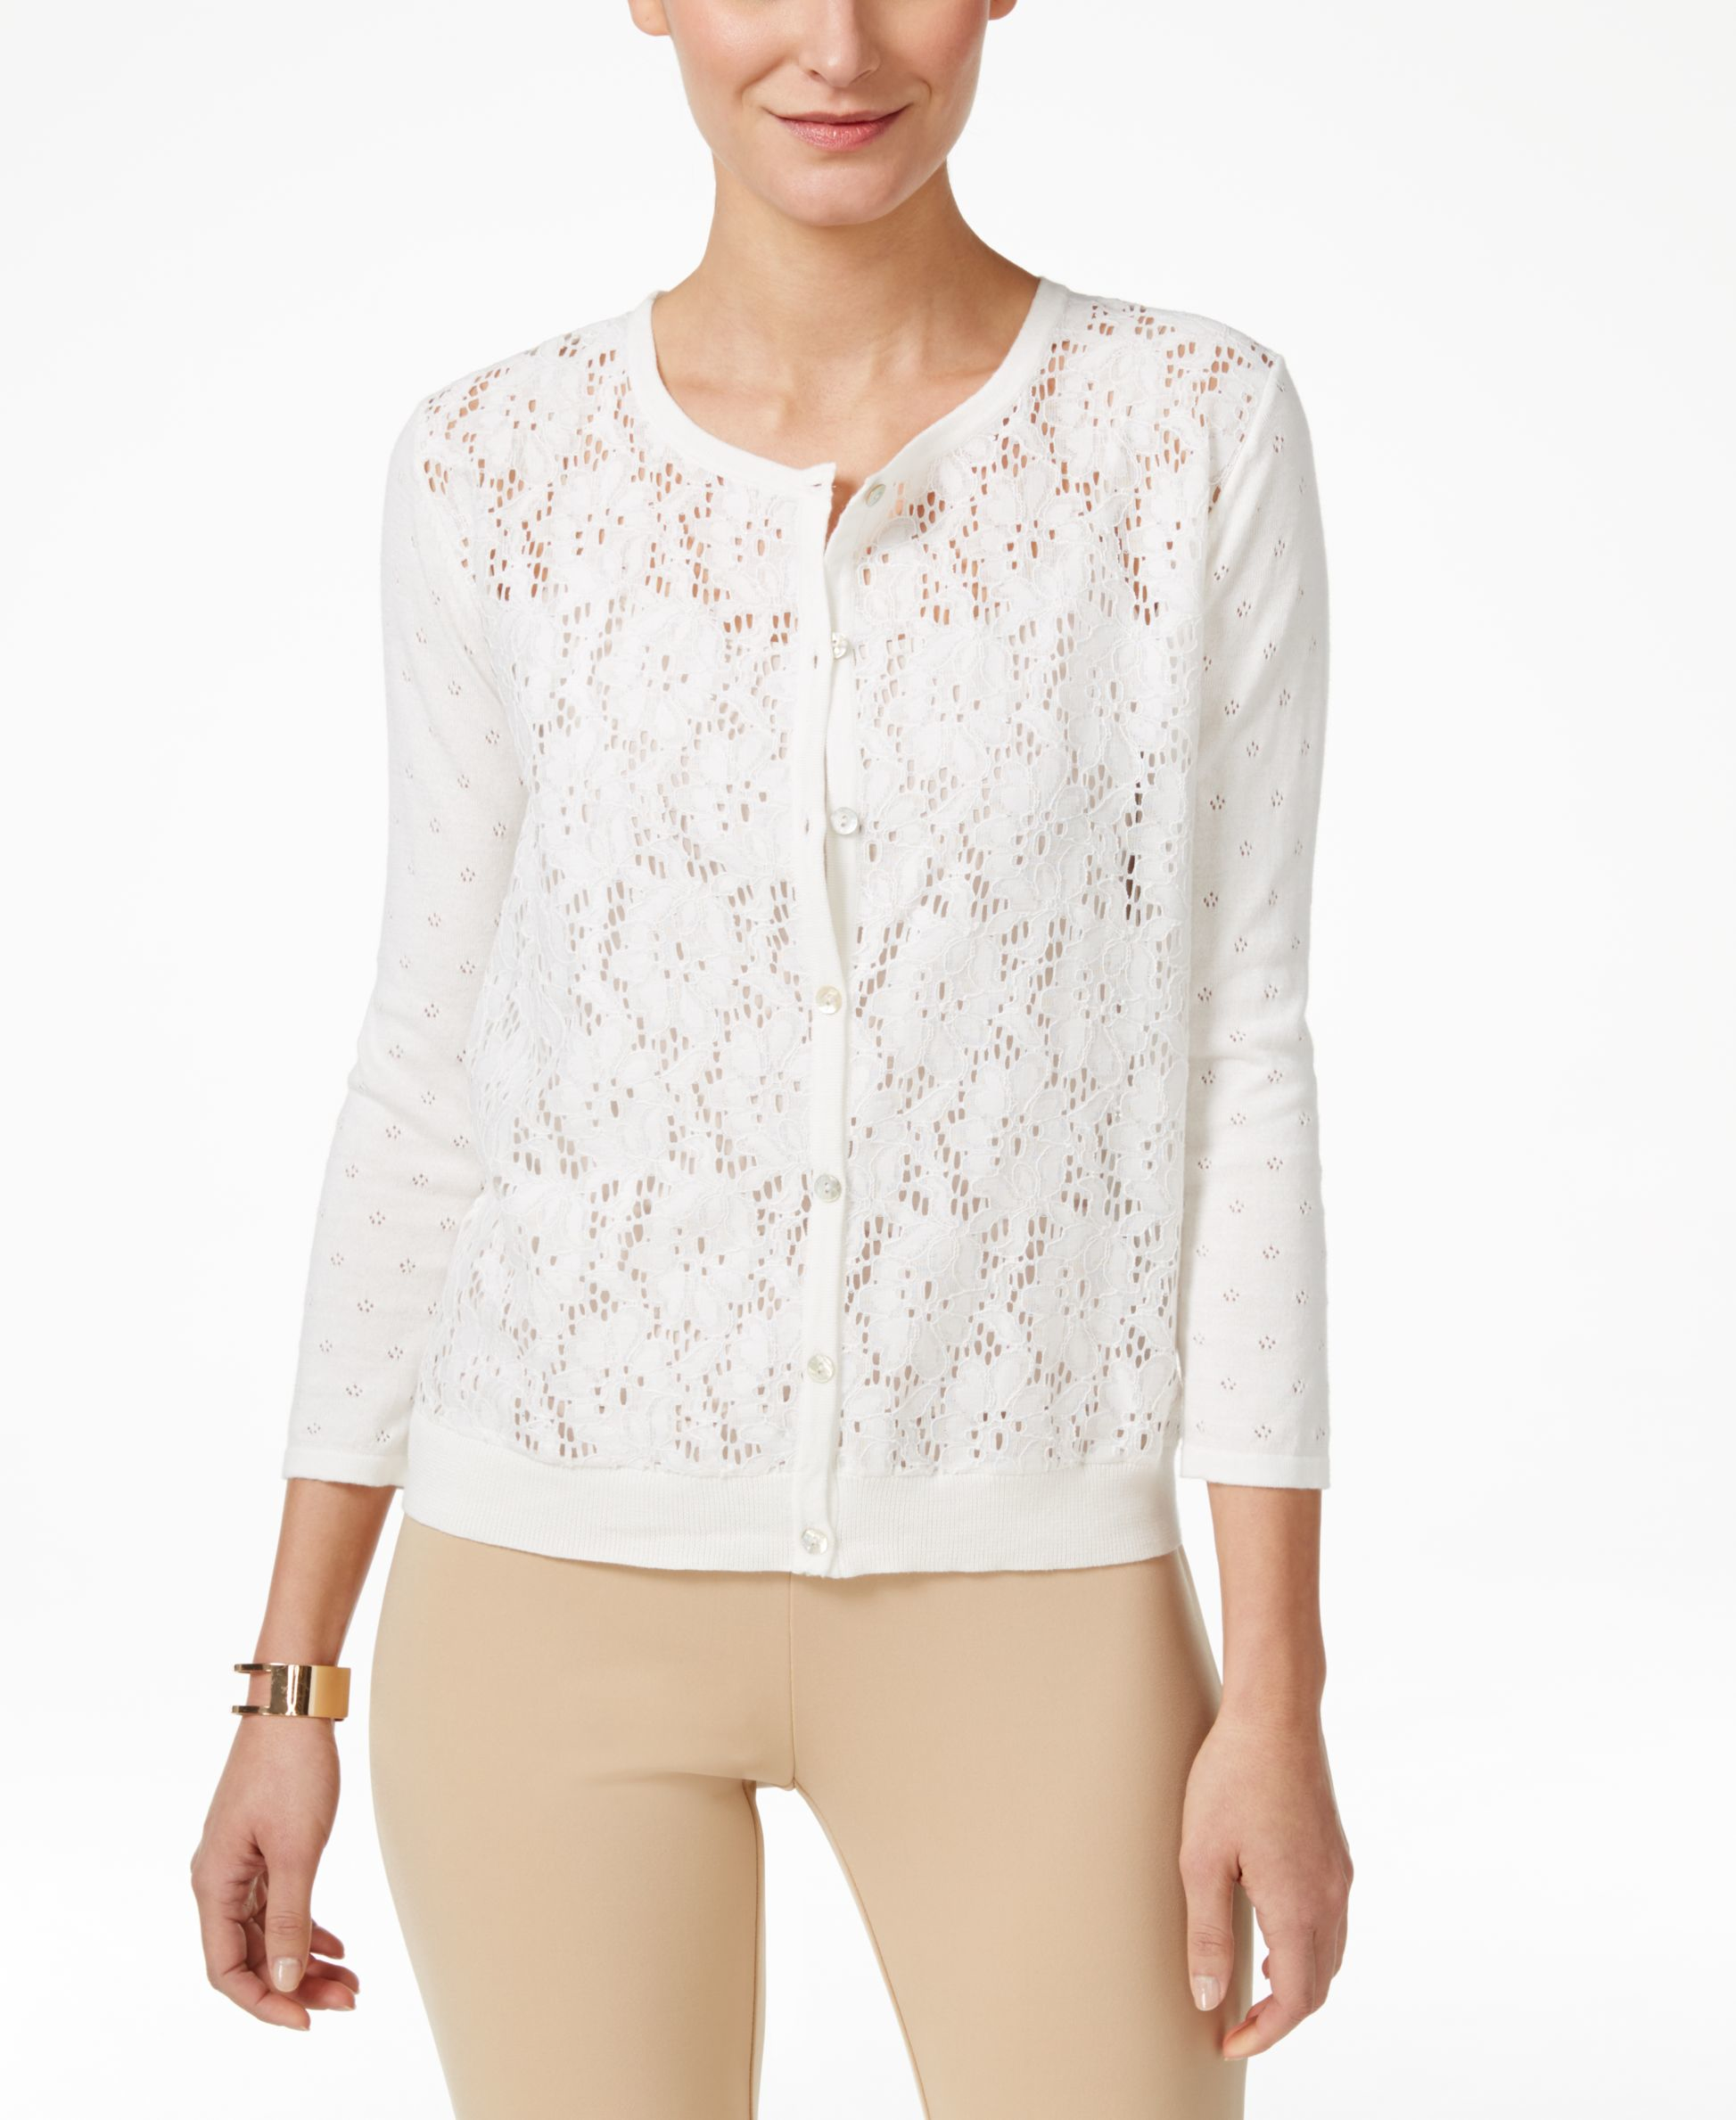 August Silk Lace-front Cardigan in White Lace (White) - Lyst